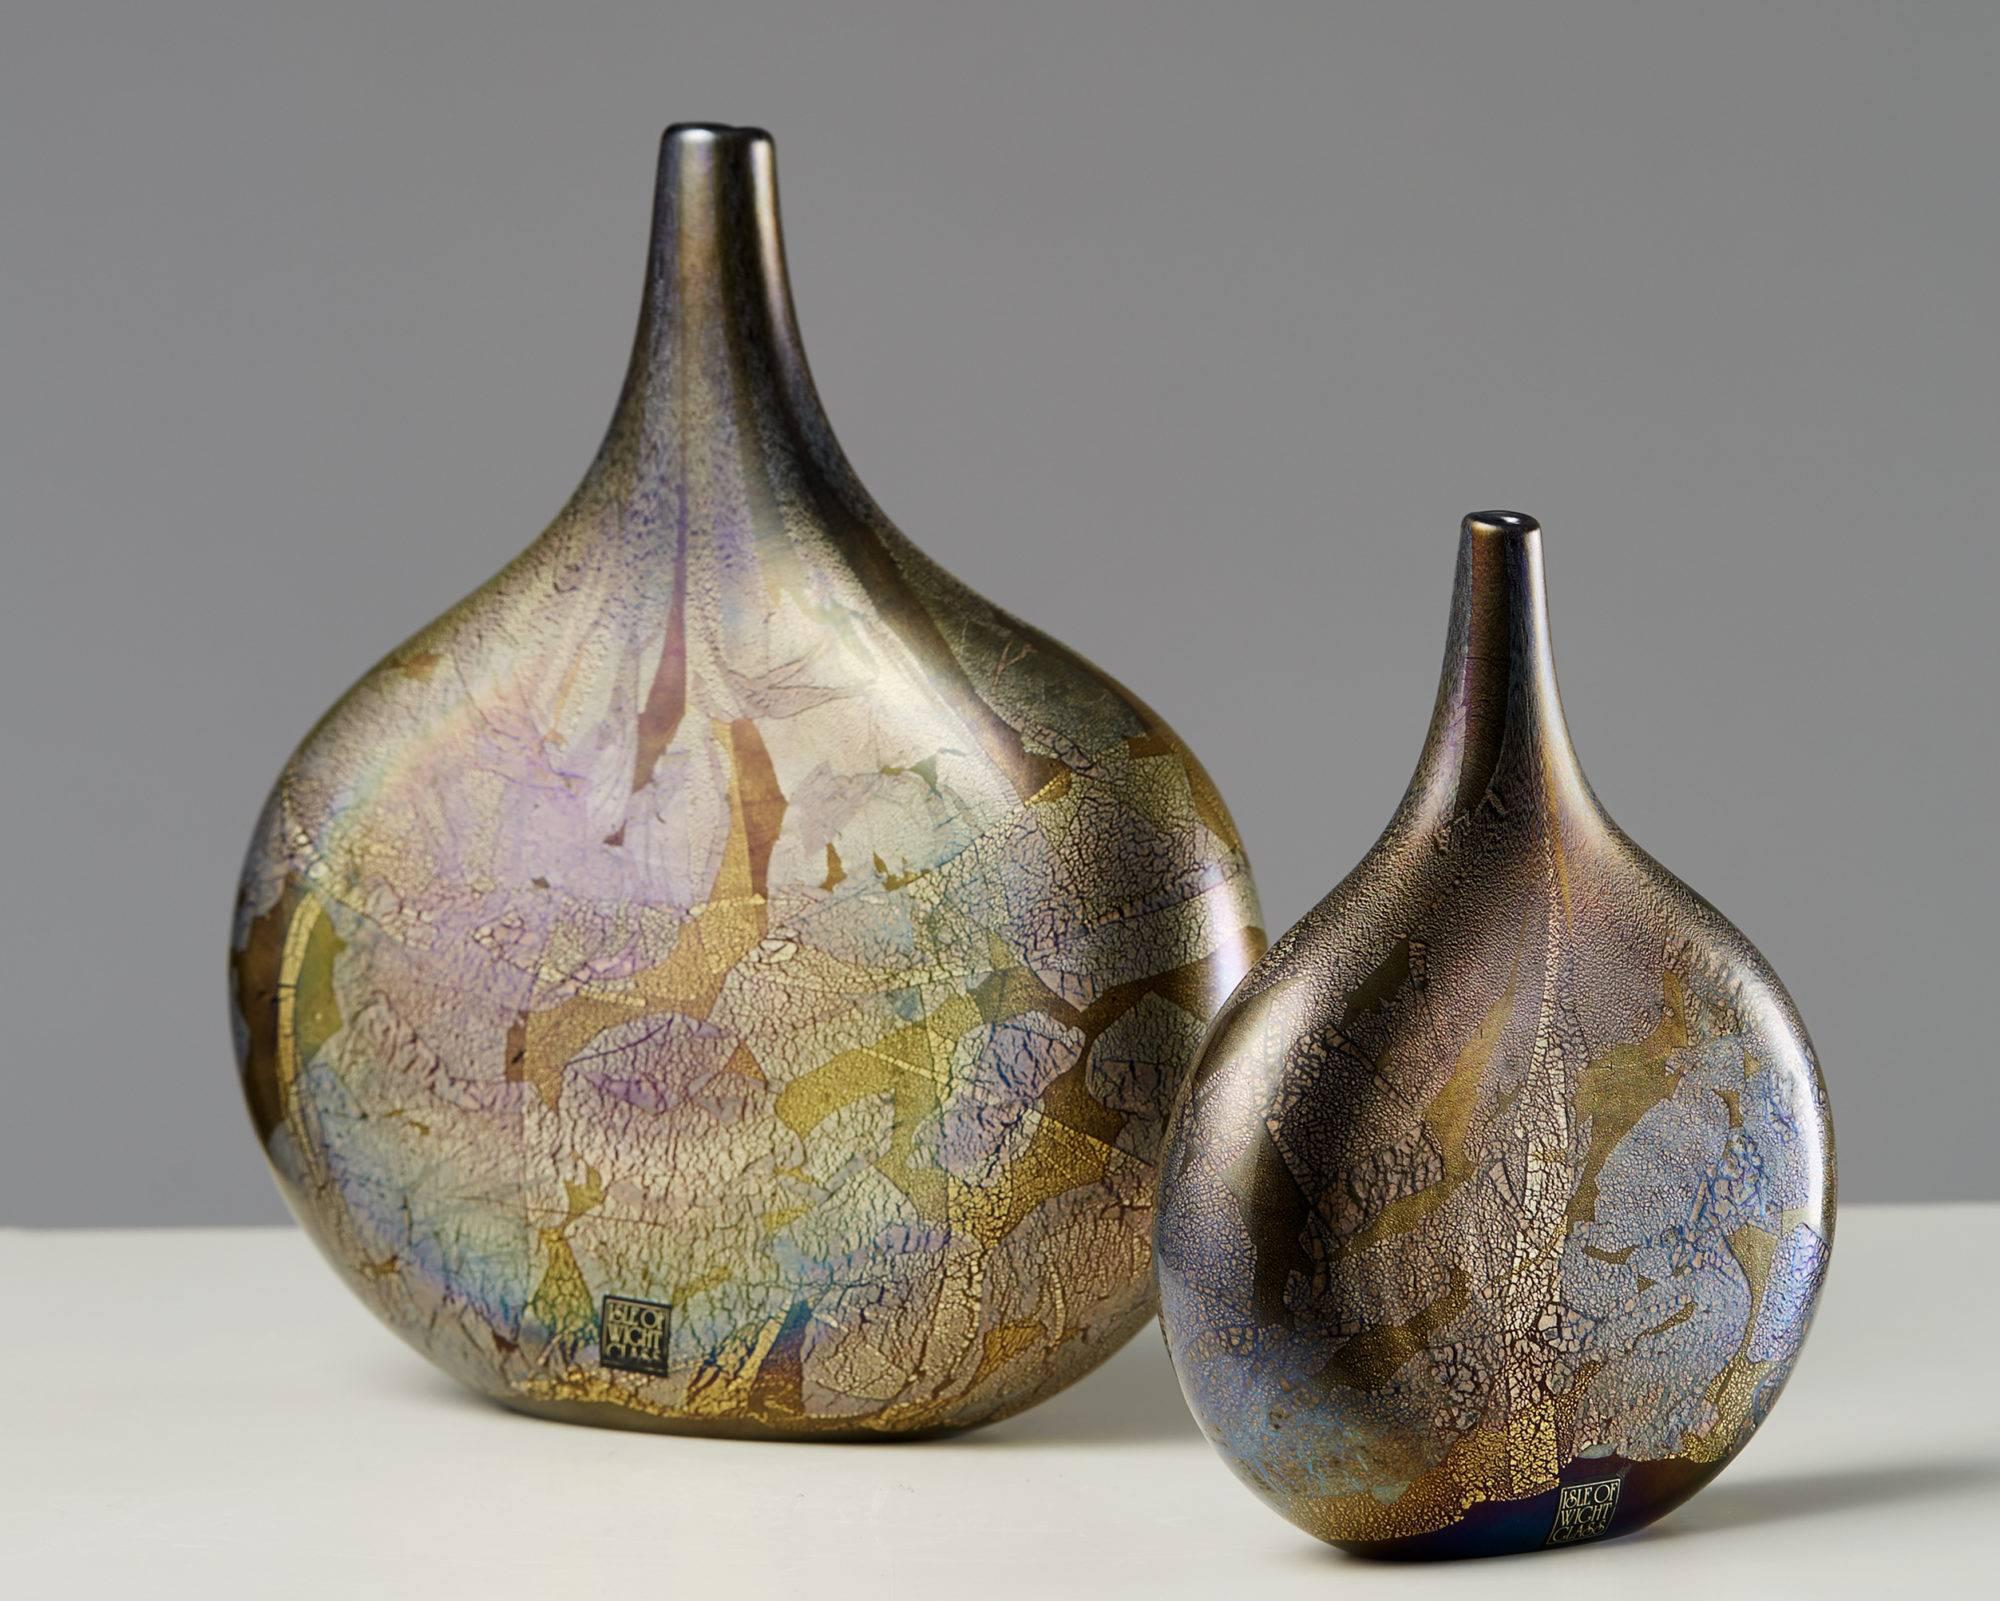 Pair of vases designed by Michael Harris for Isle of Wight glass, United Kingdom, 
1990s.

Measures: Height of the largest: 21 cm/ 8 1/4''
Diameter of the largest: 18 cm
Height of the smaller: 15 cm/ 6''
Diameter of the smaller: 12cm.